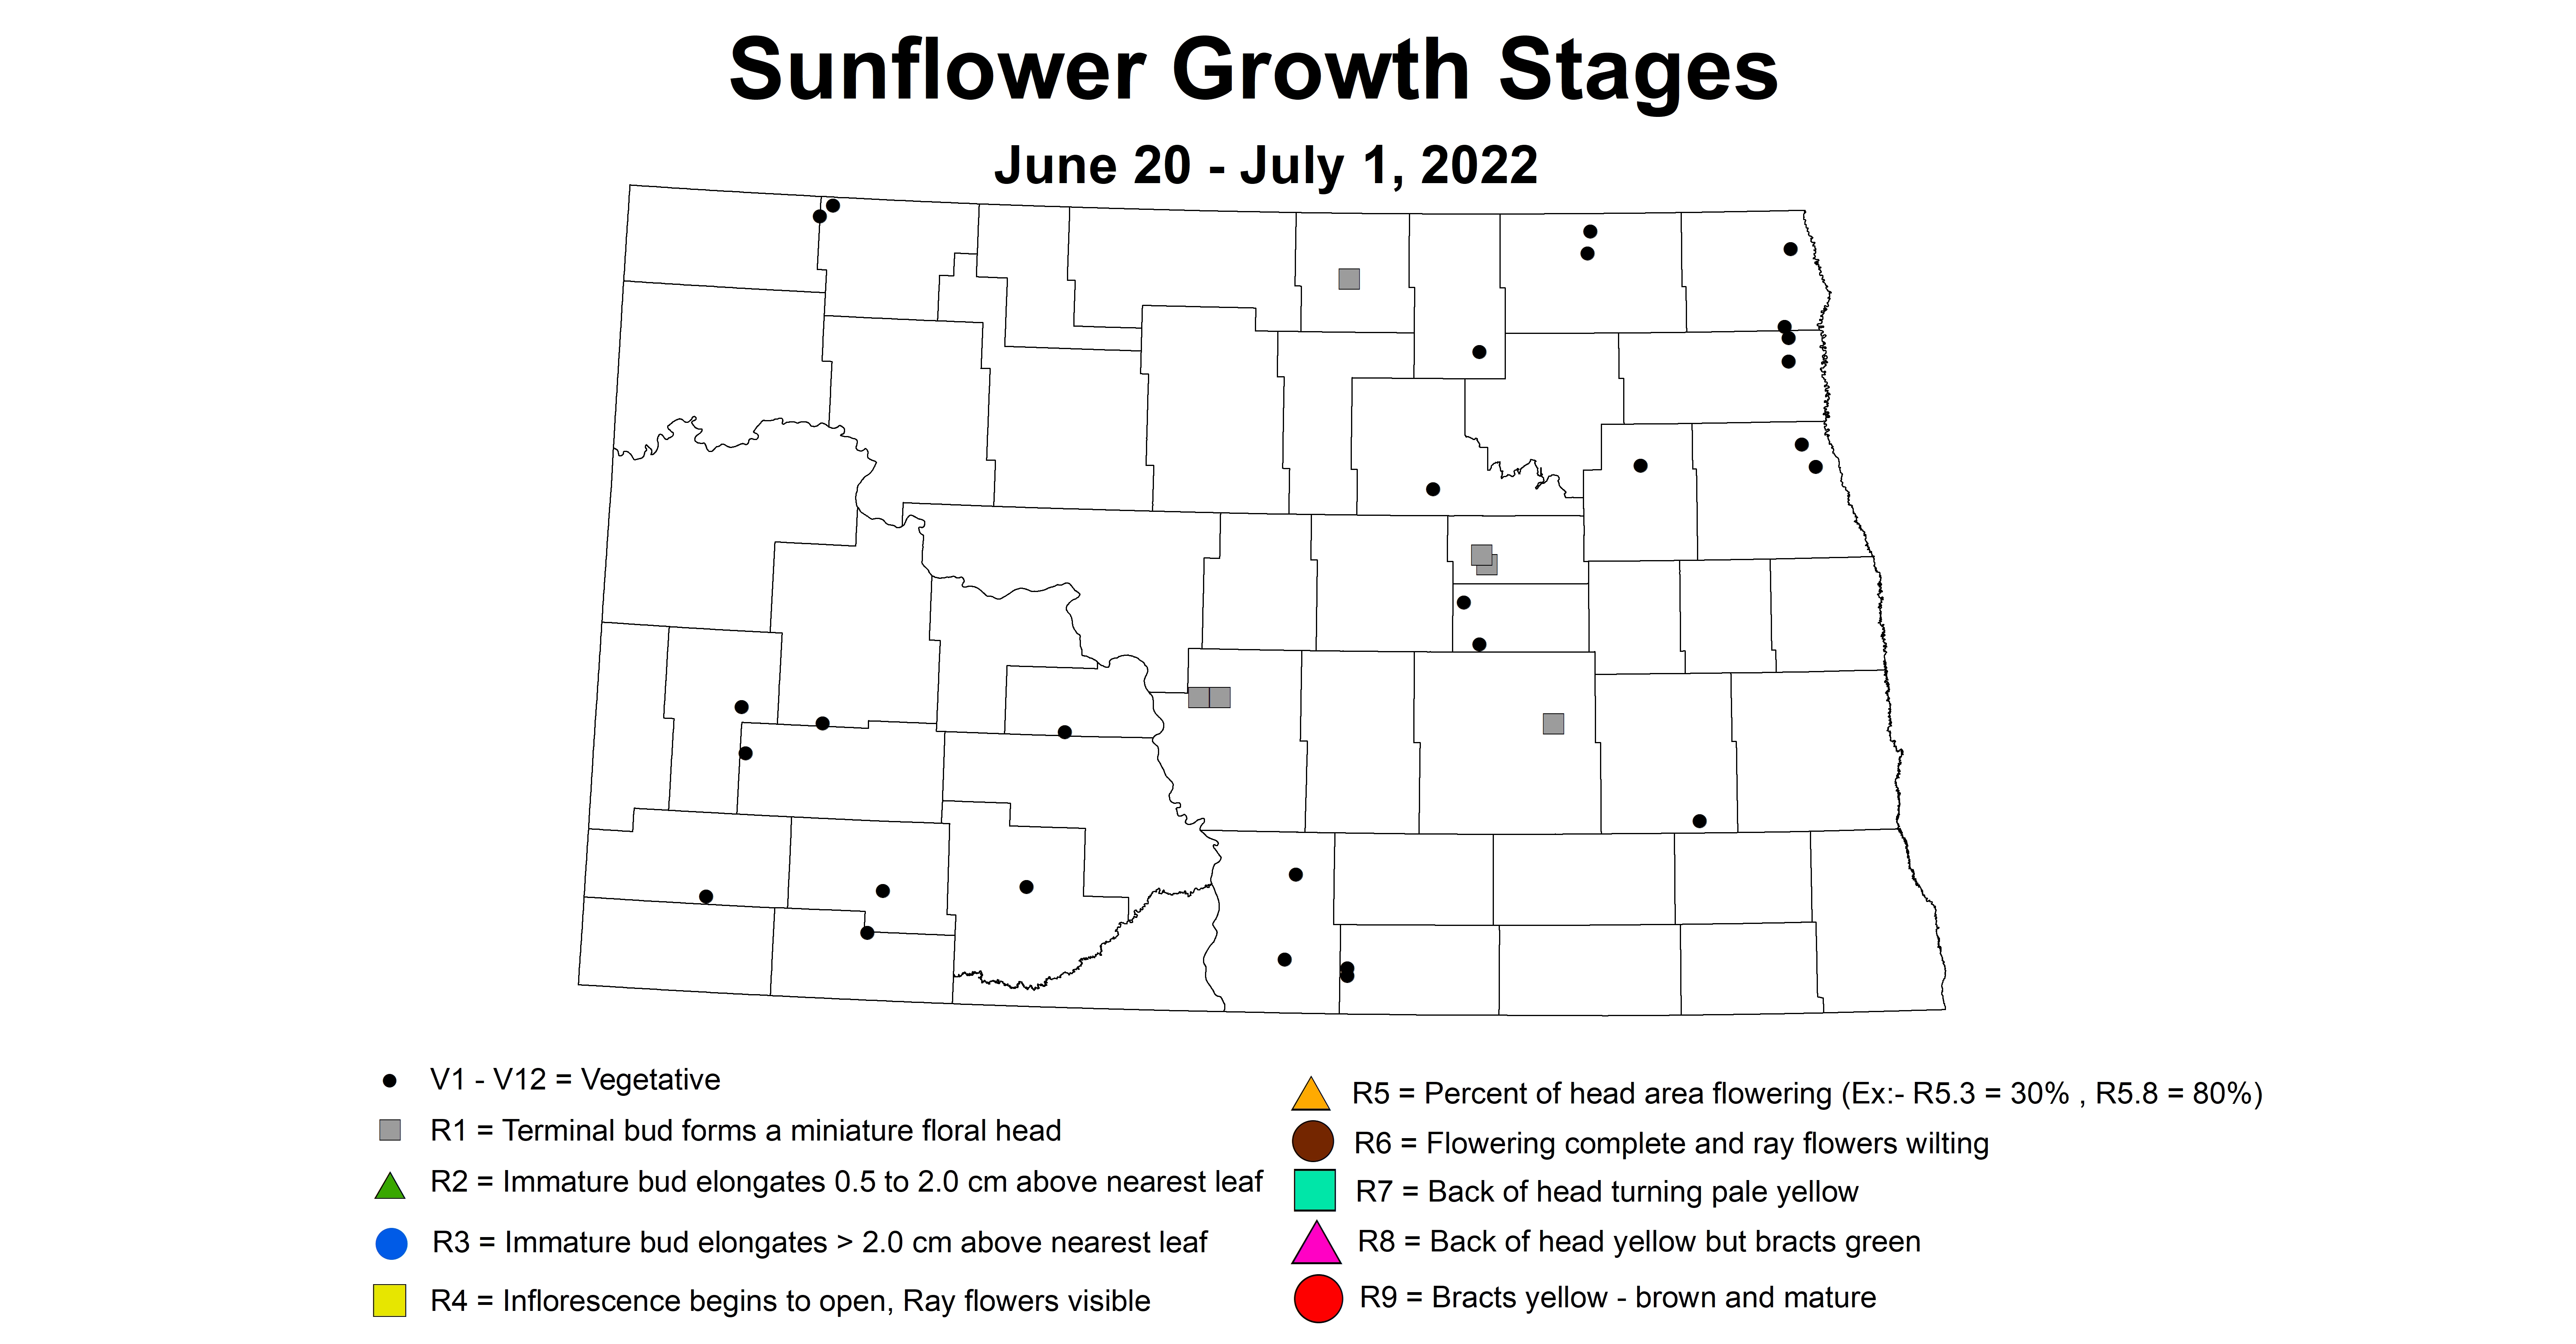 ND IPM map of sunflower growth stages June 20 to July 1 2022